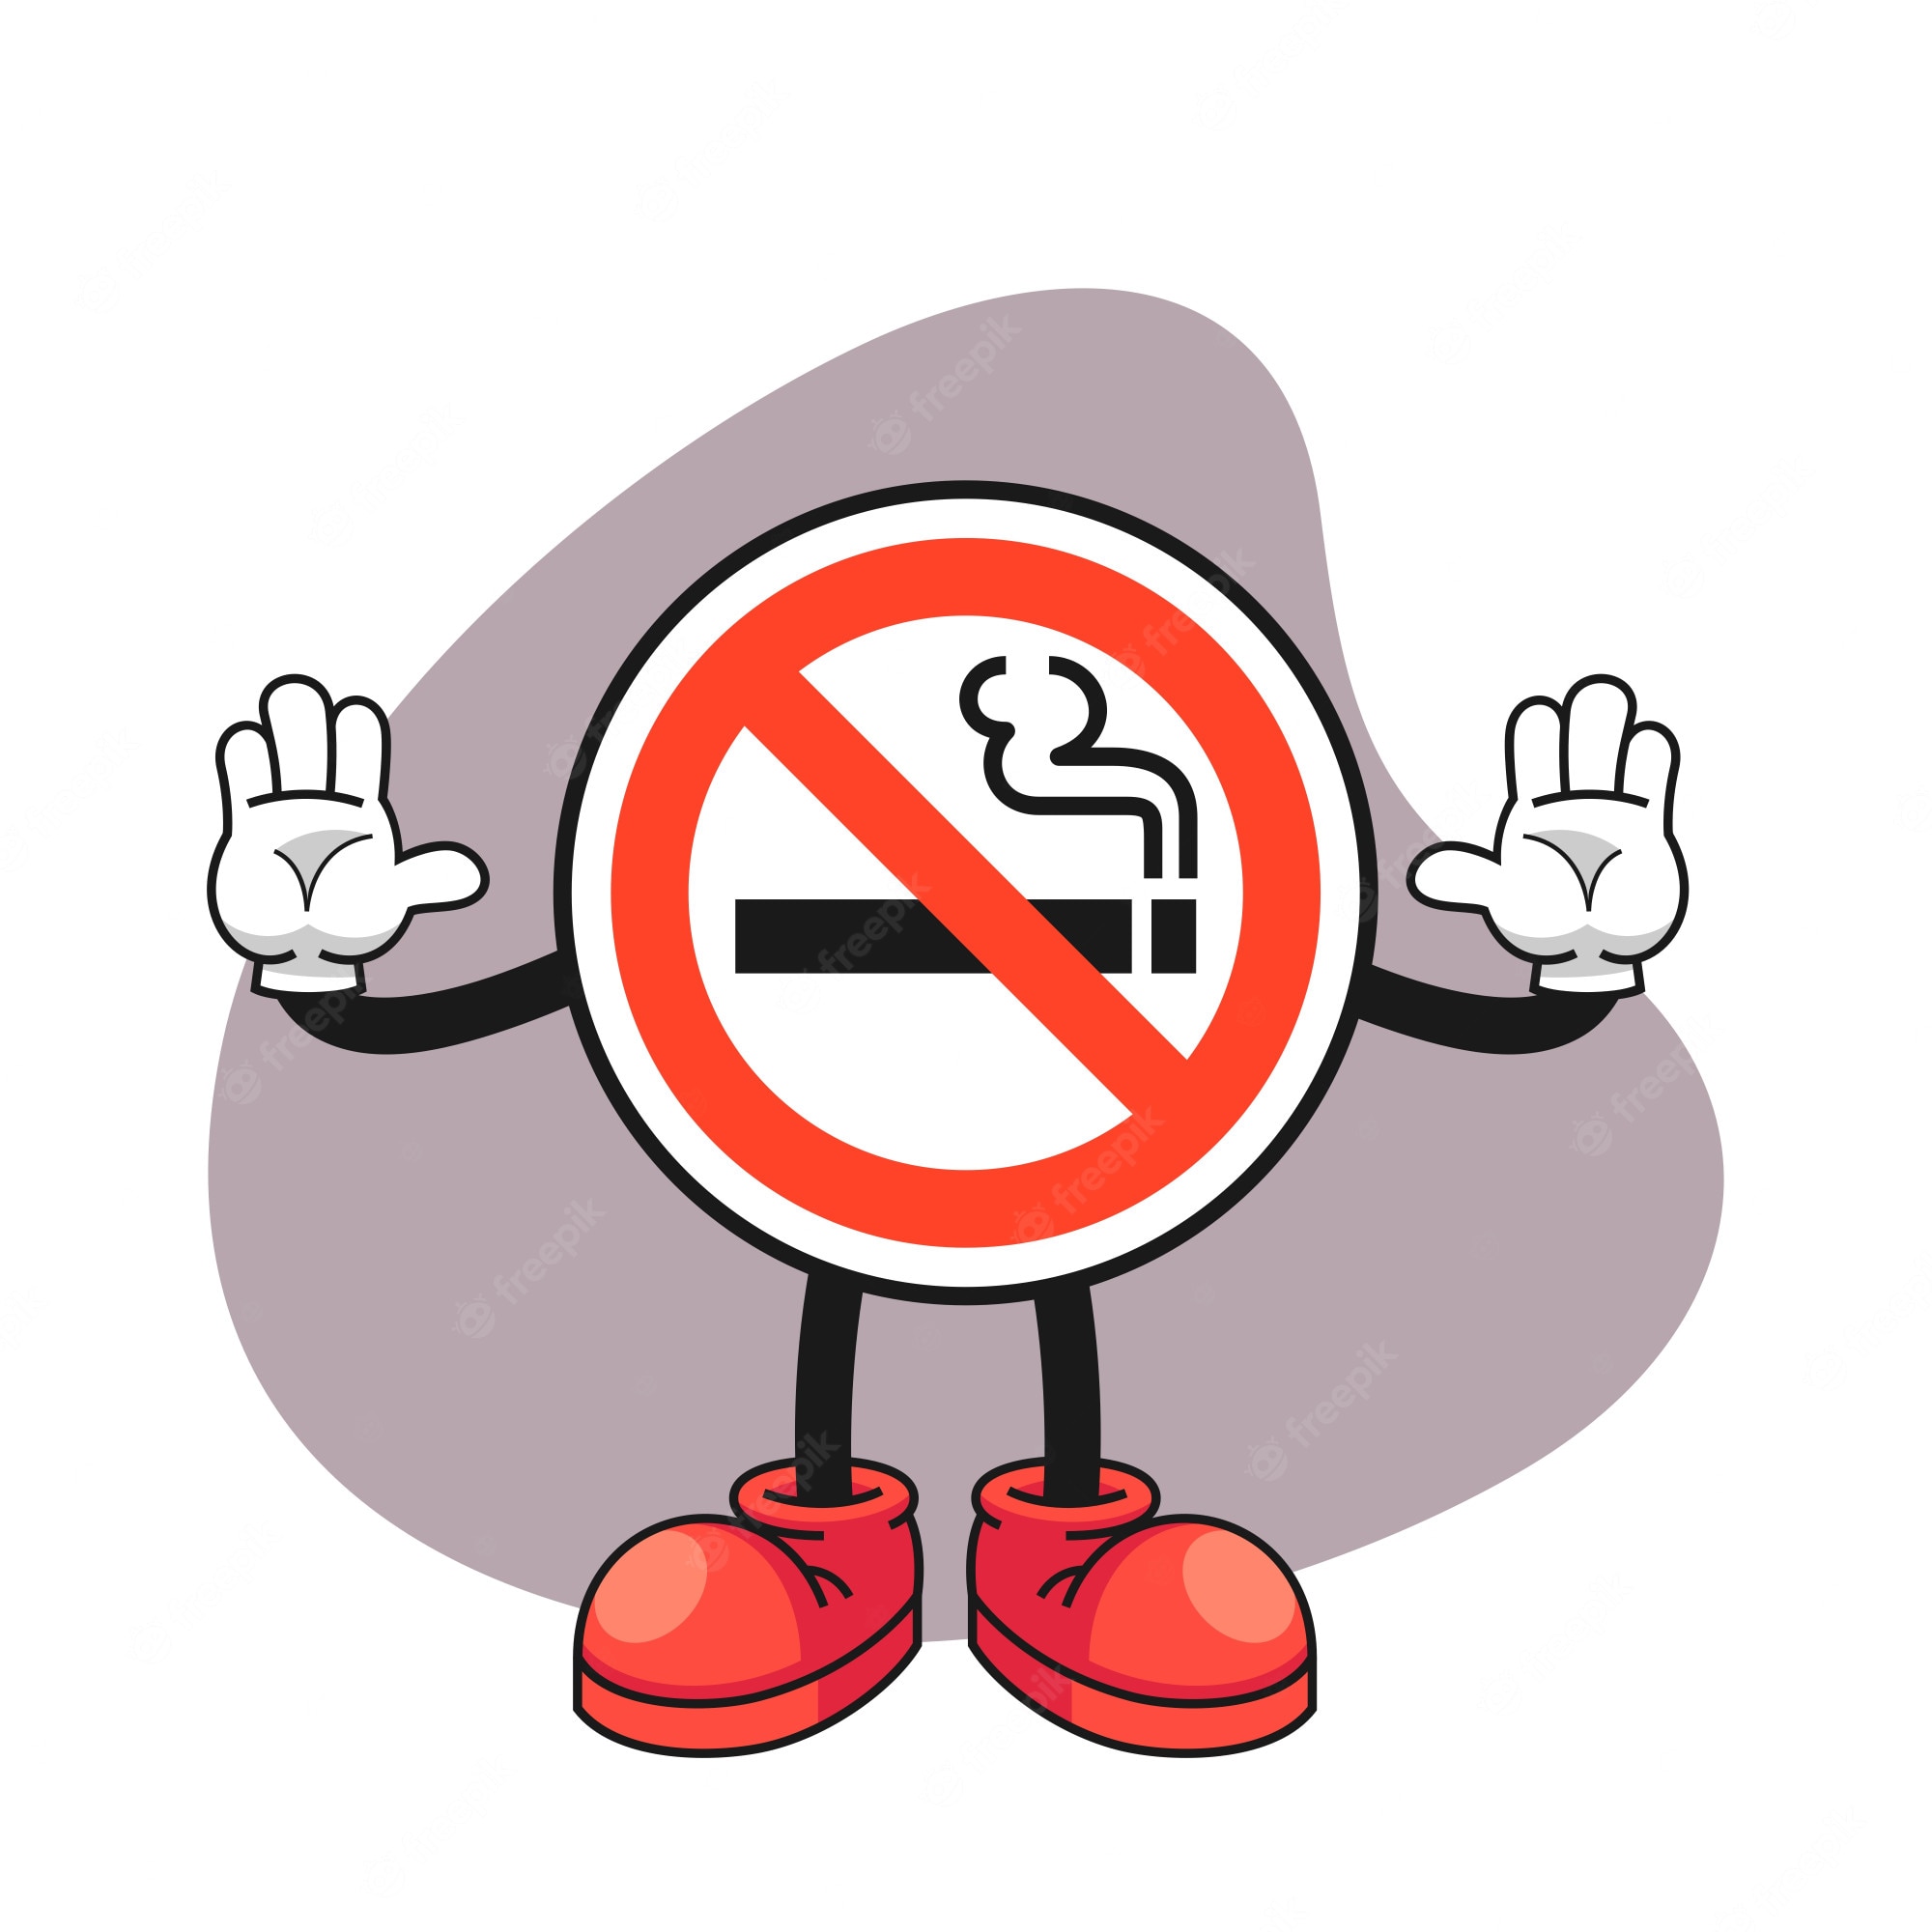 Premium Vector | No smoking sign cartoon character with a stop hand gesture